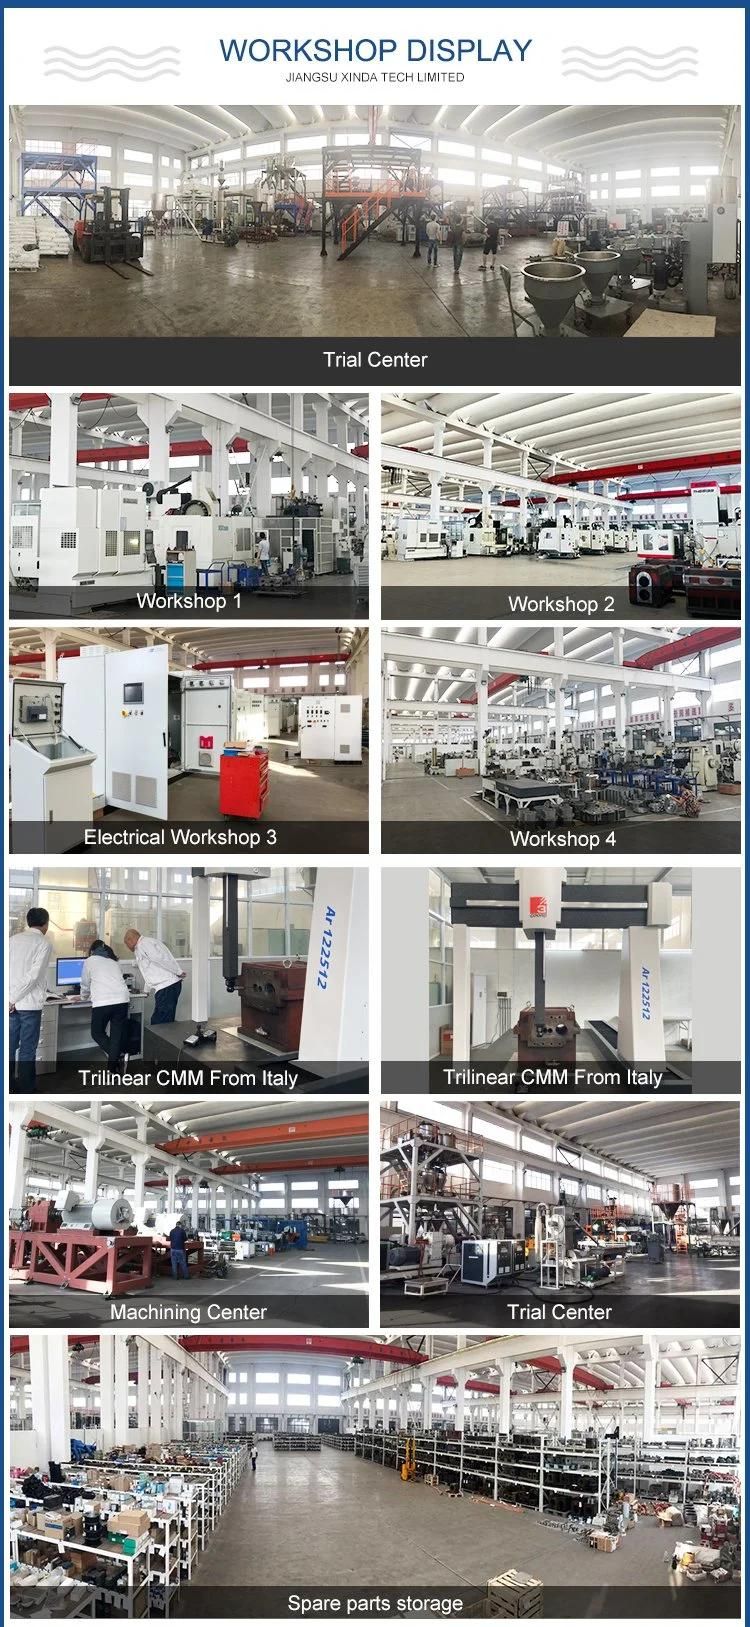 Clamshell Barrel Lab Application or Small Scale Production Twin Screw Extruder/for PP PE CaCO3/ MIM